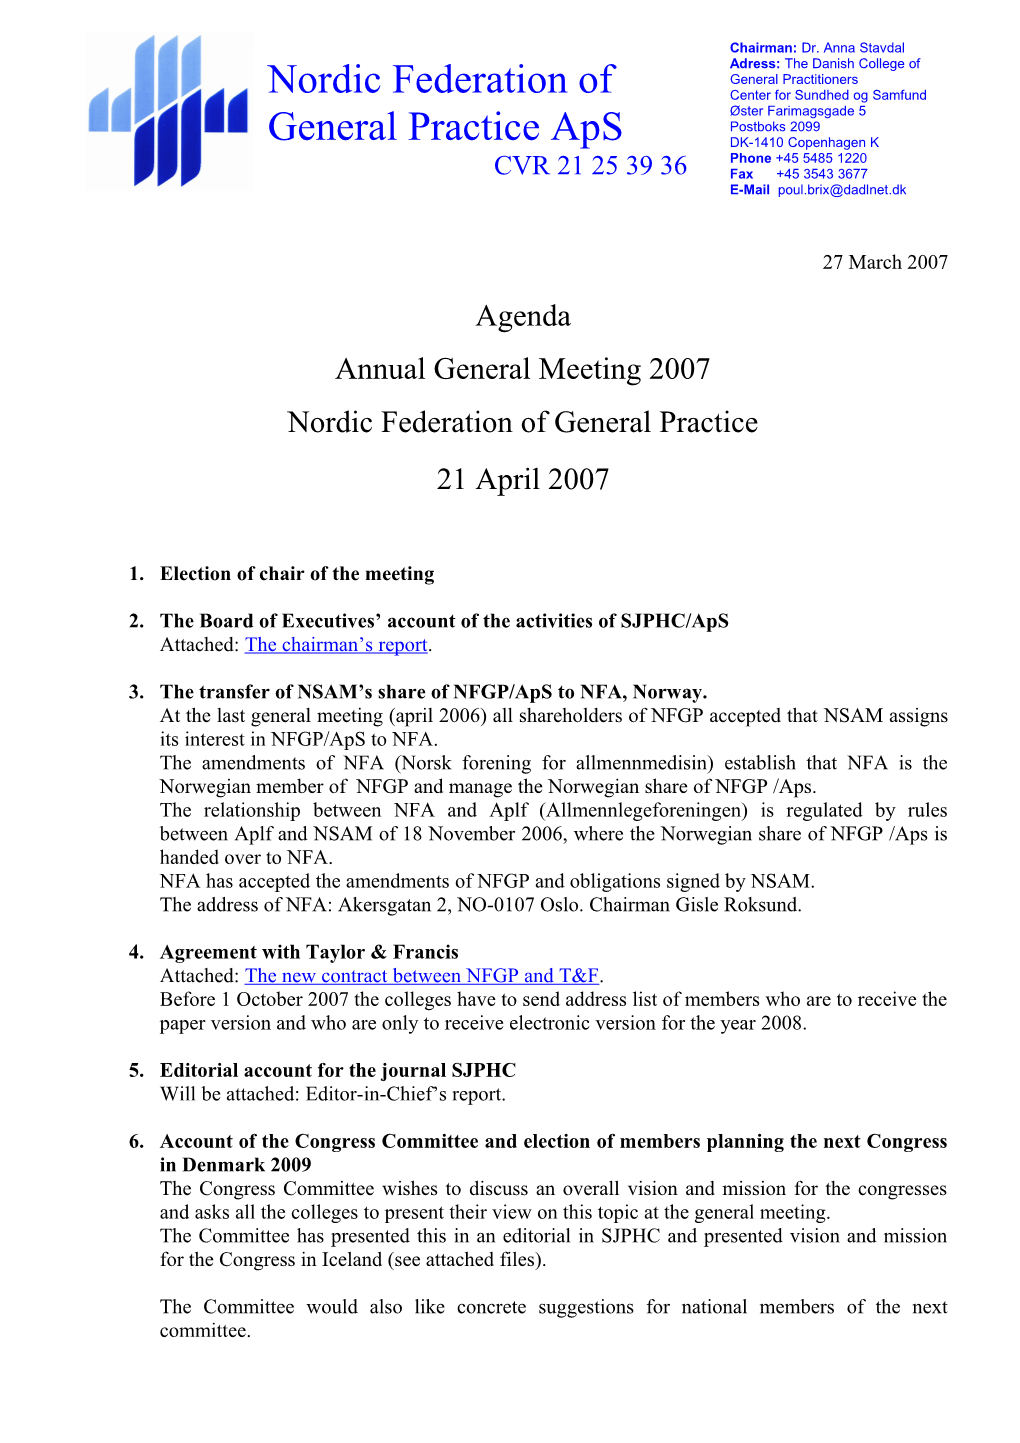 Nordic Federation of General Practice